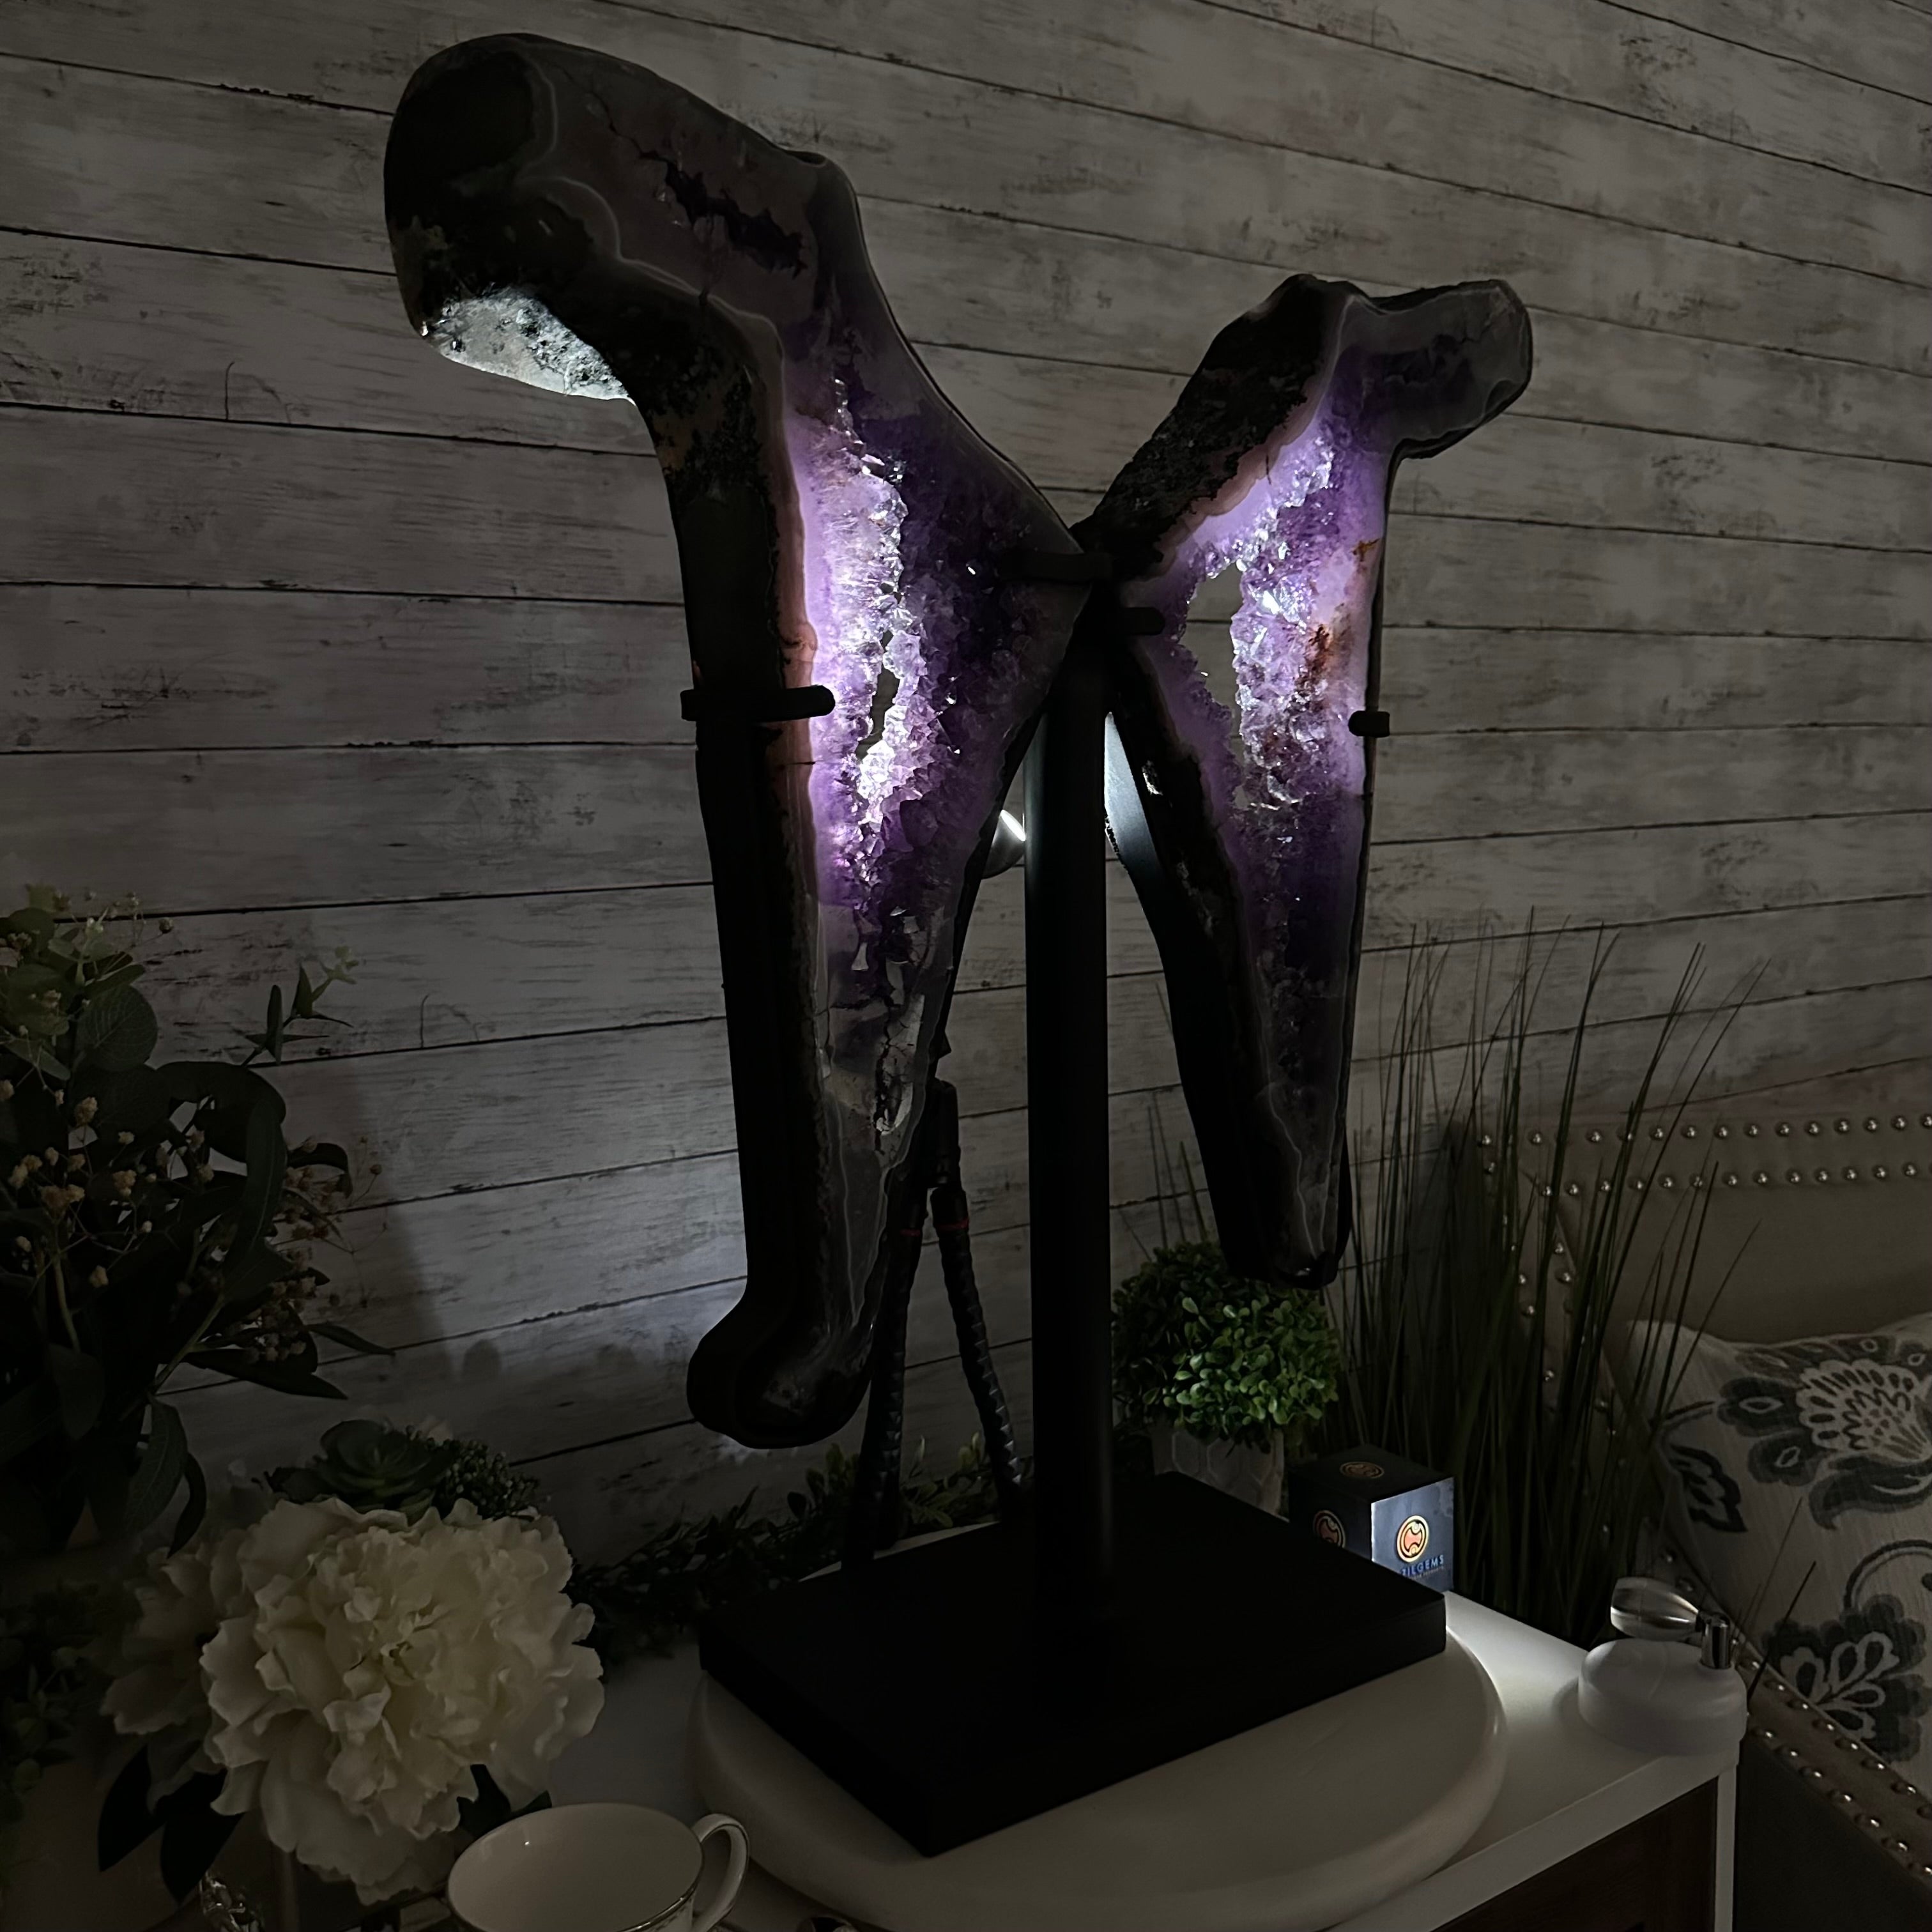 Amethyst Butterfly Wings on Metal Stand, 40.9 lbs, 27.4" Tall #5493 - 0042 - Brazil GemsBrazil GemsAmethyst Butterfly Wings on Metal Stand, 40.9 lbs, 27.4" Tall #5493 - 0042Amethyst Butterfly Wings5493 - 0042